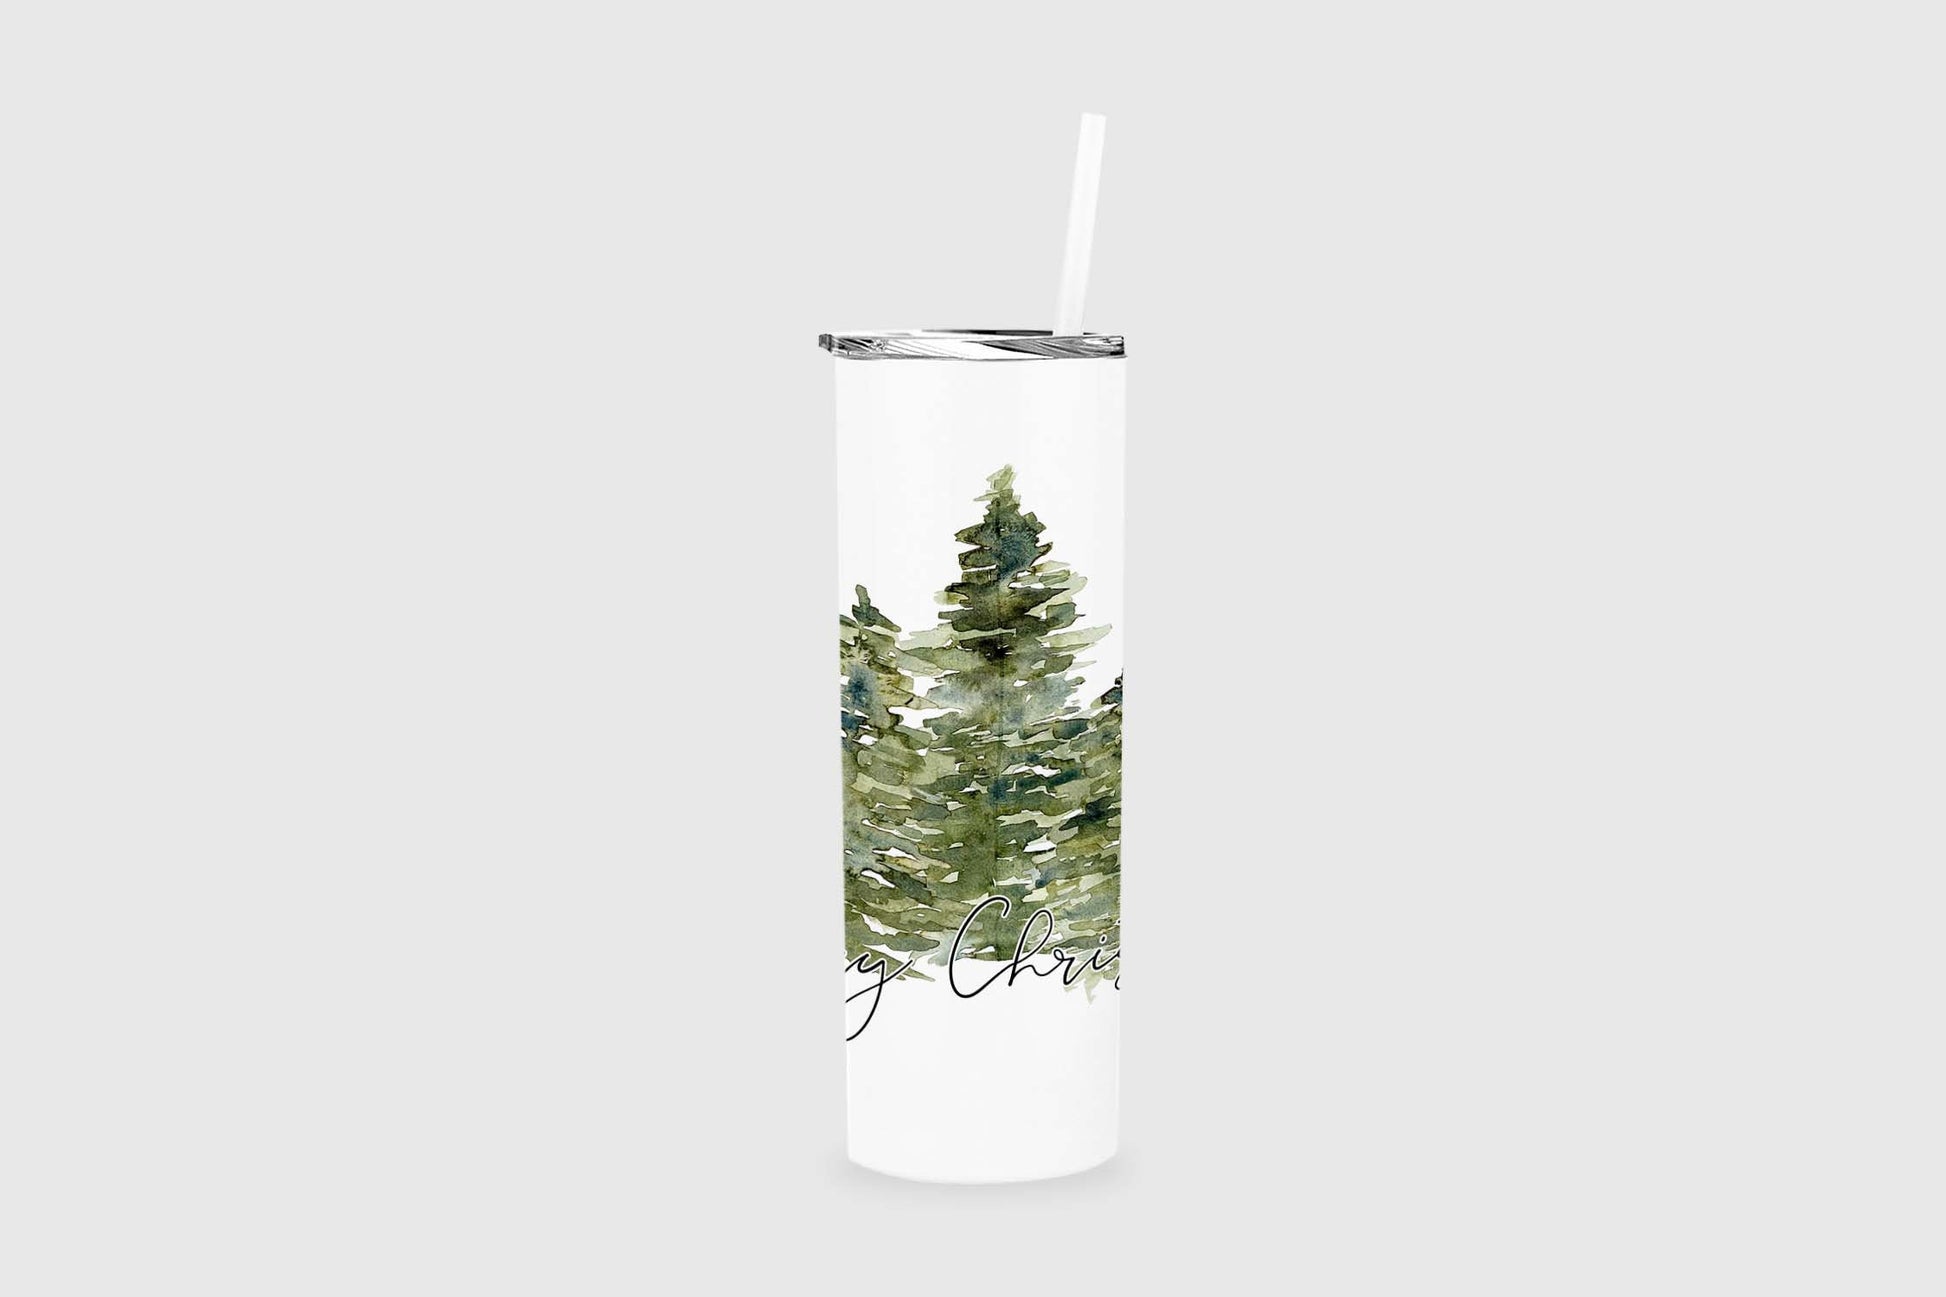 Merry Christmas Trees Sublimation Designs - Christmas Waterslide png Download- Christmas Tree Clip Art - Watercolor Sublimation Design